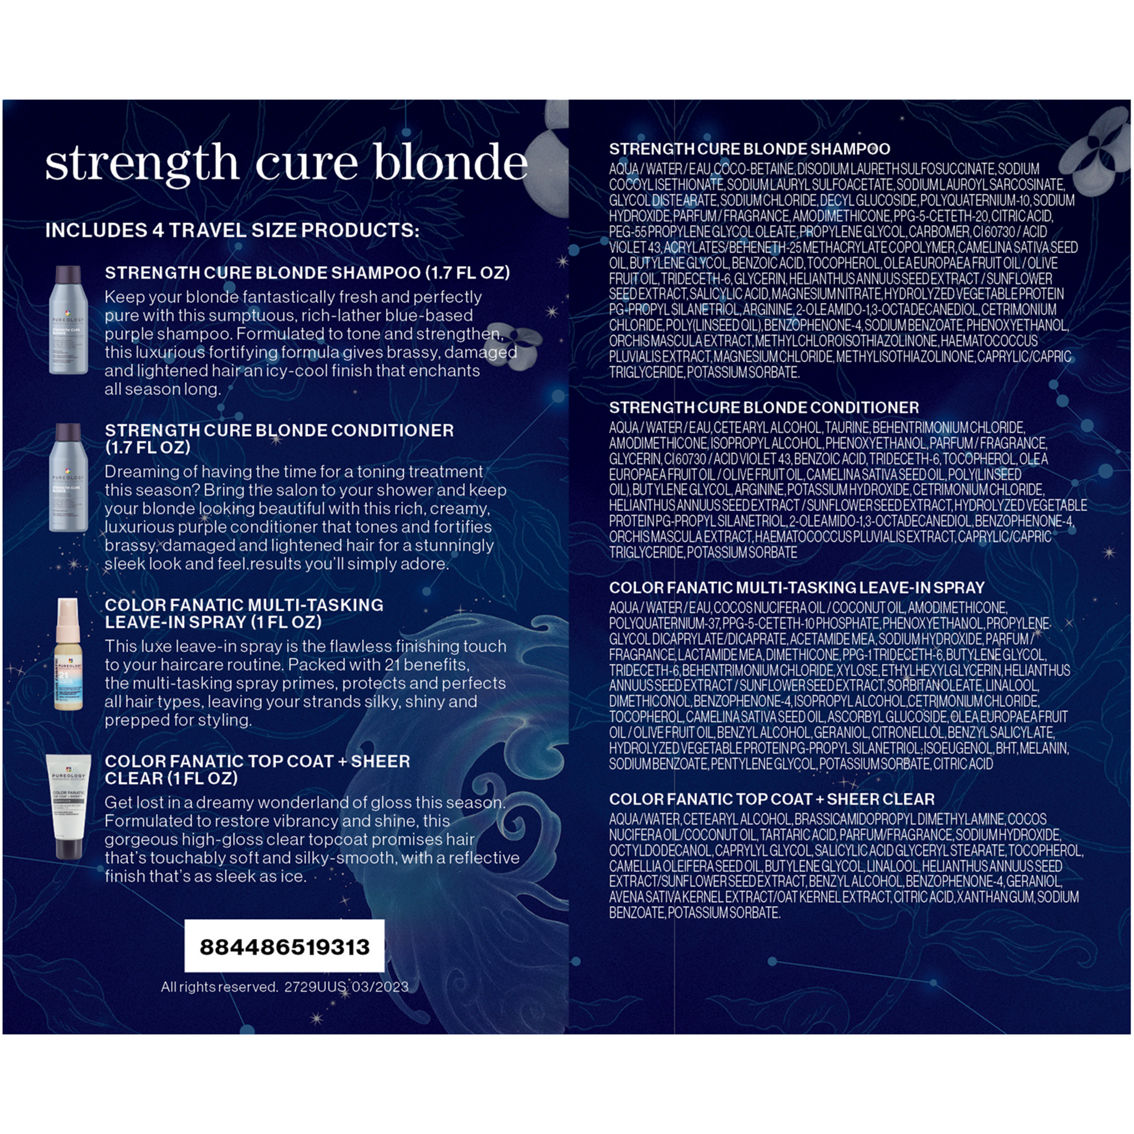 Pureology Strength Cure Blonde Quad Travel Size Kit - Image 2 of 2